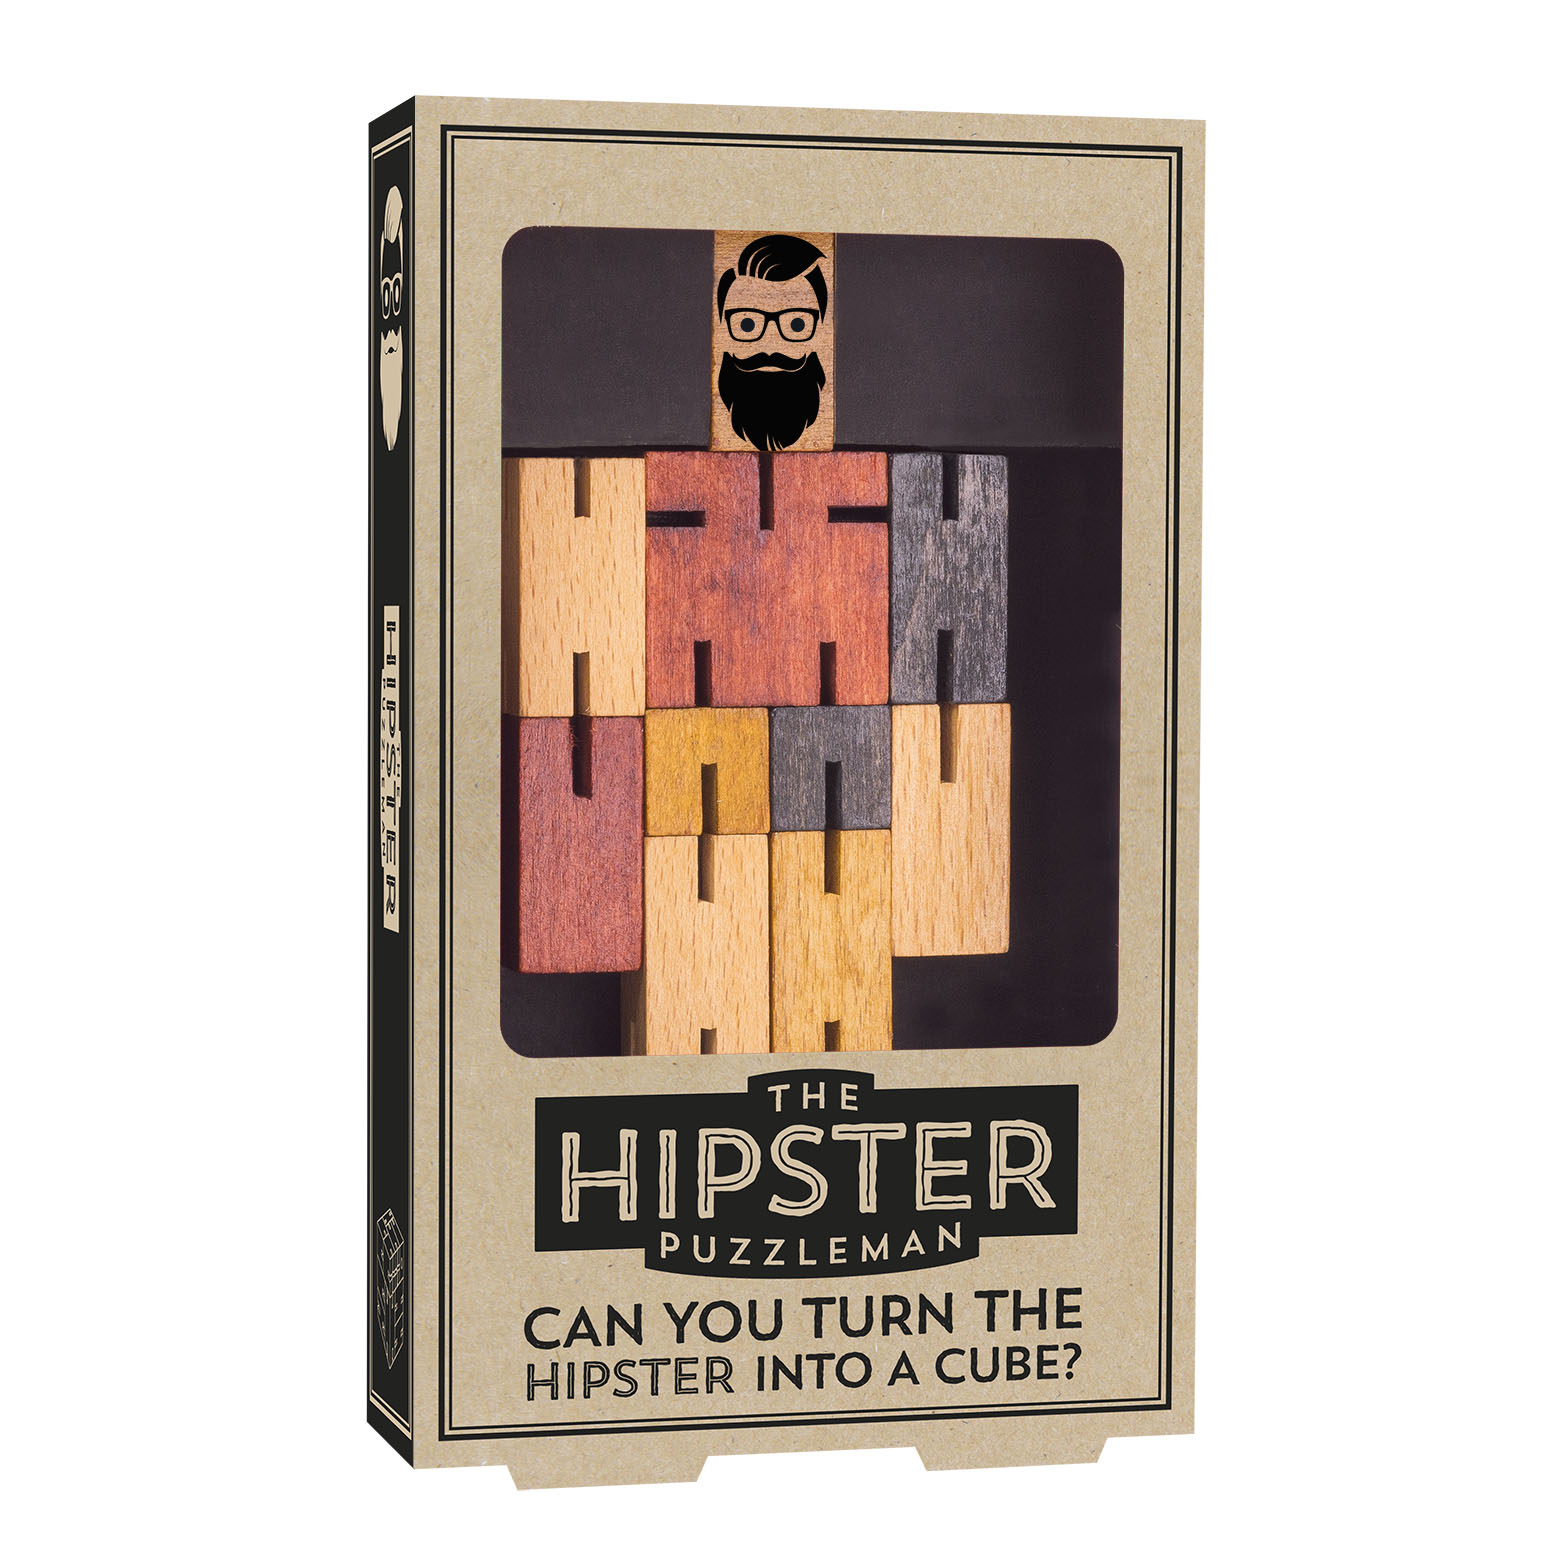 Puzzleman Hipster